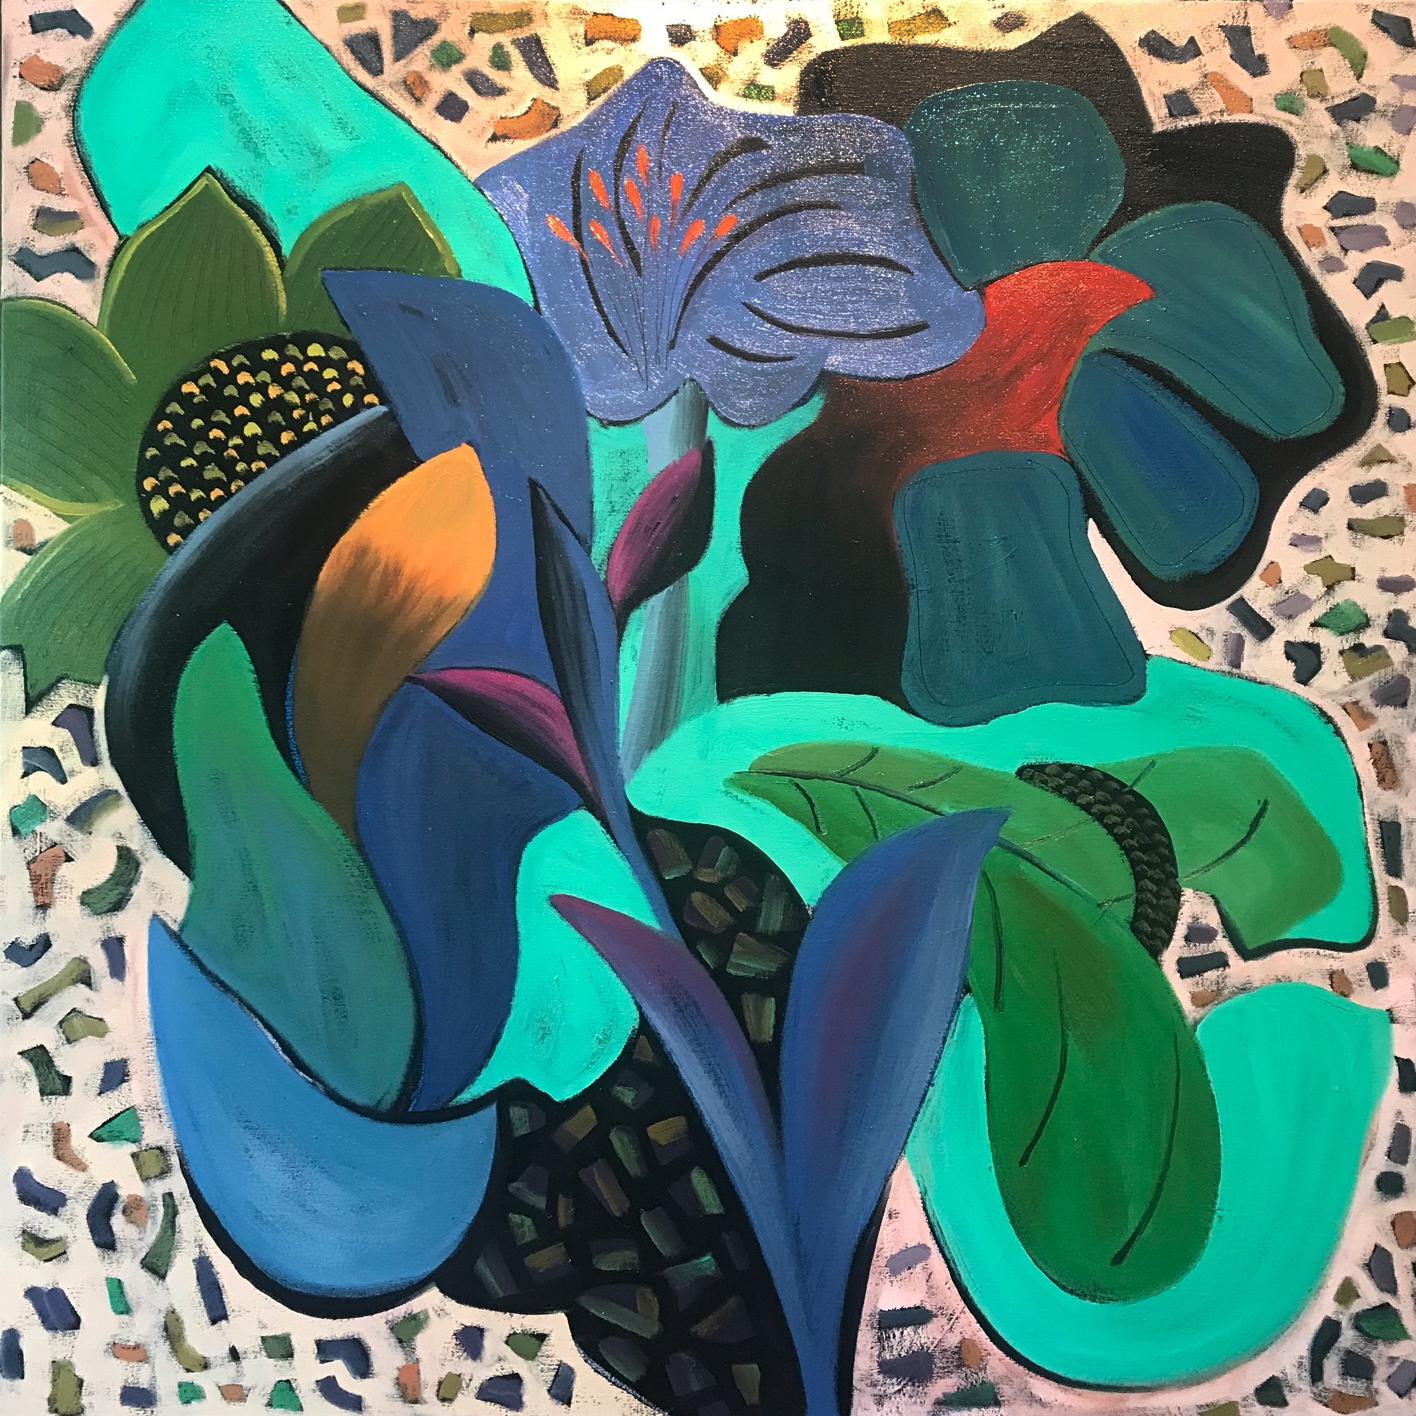 A floral, but instead of a vase it finds itself in a jungle setting. Rich reds weave amongst the large green leaves and white flowers creating fullness for this tropical jungle

Floral  - Abstract Paintings - Contemporary Art By Marc Zimmerman

This